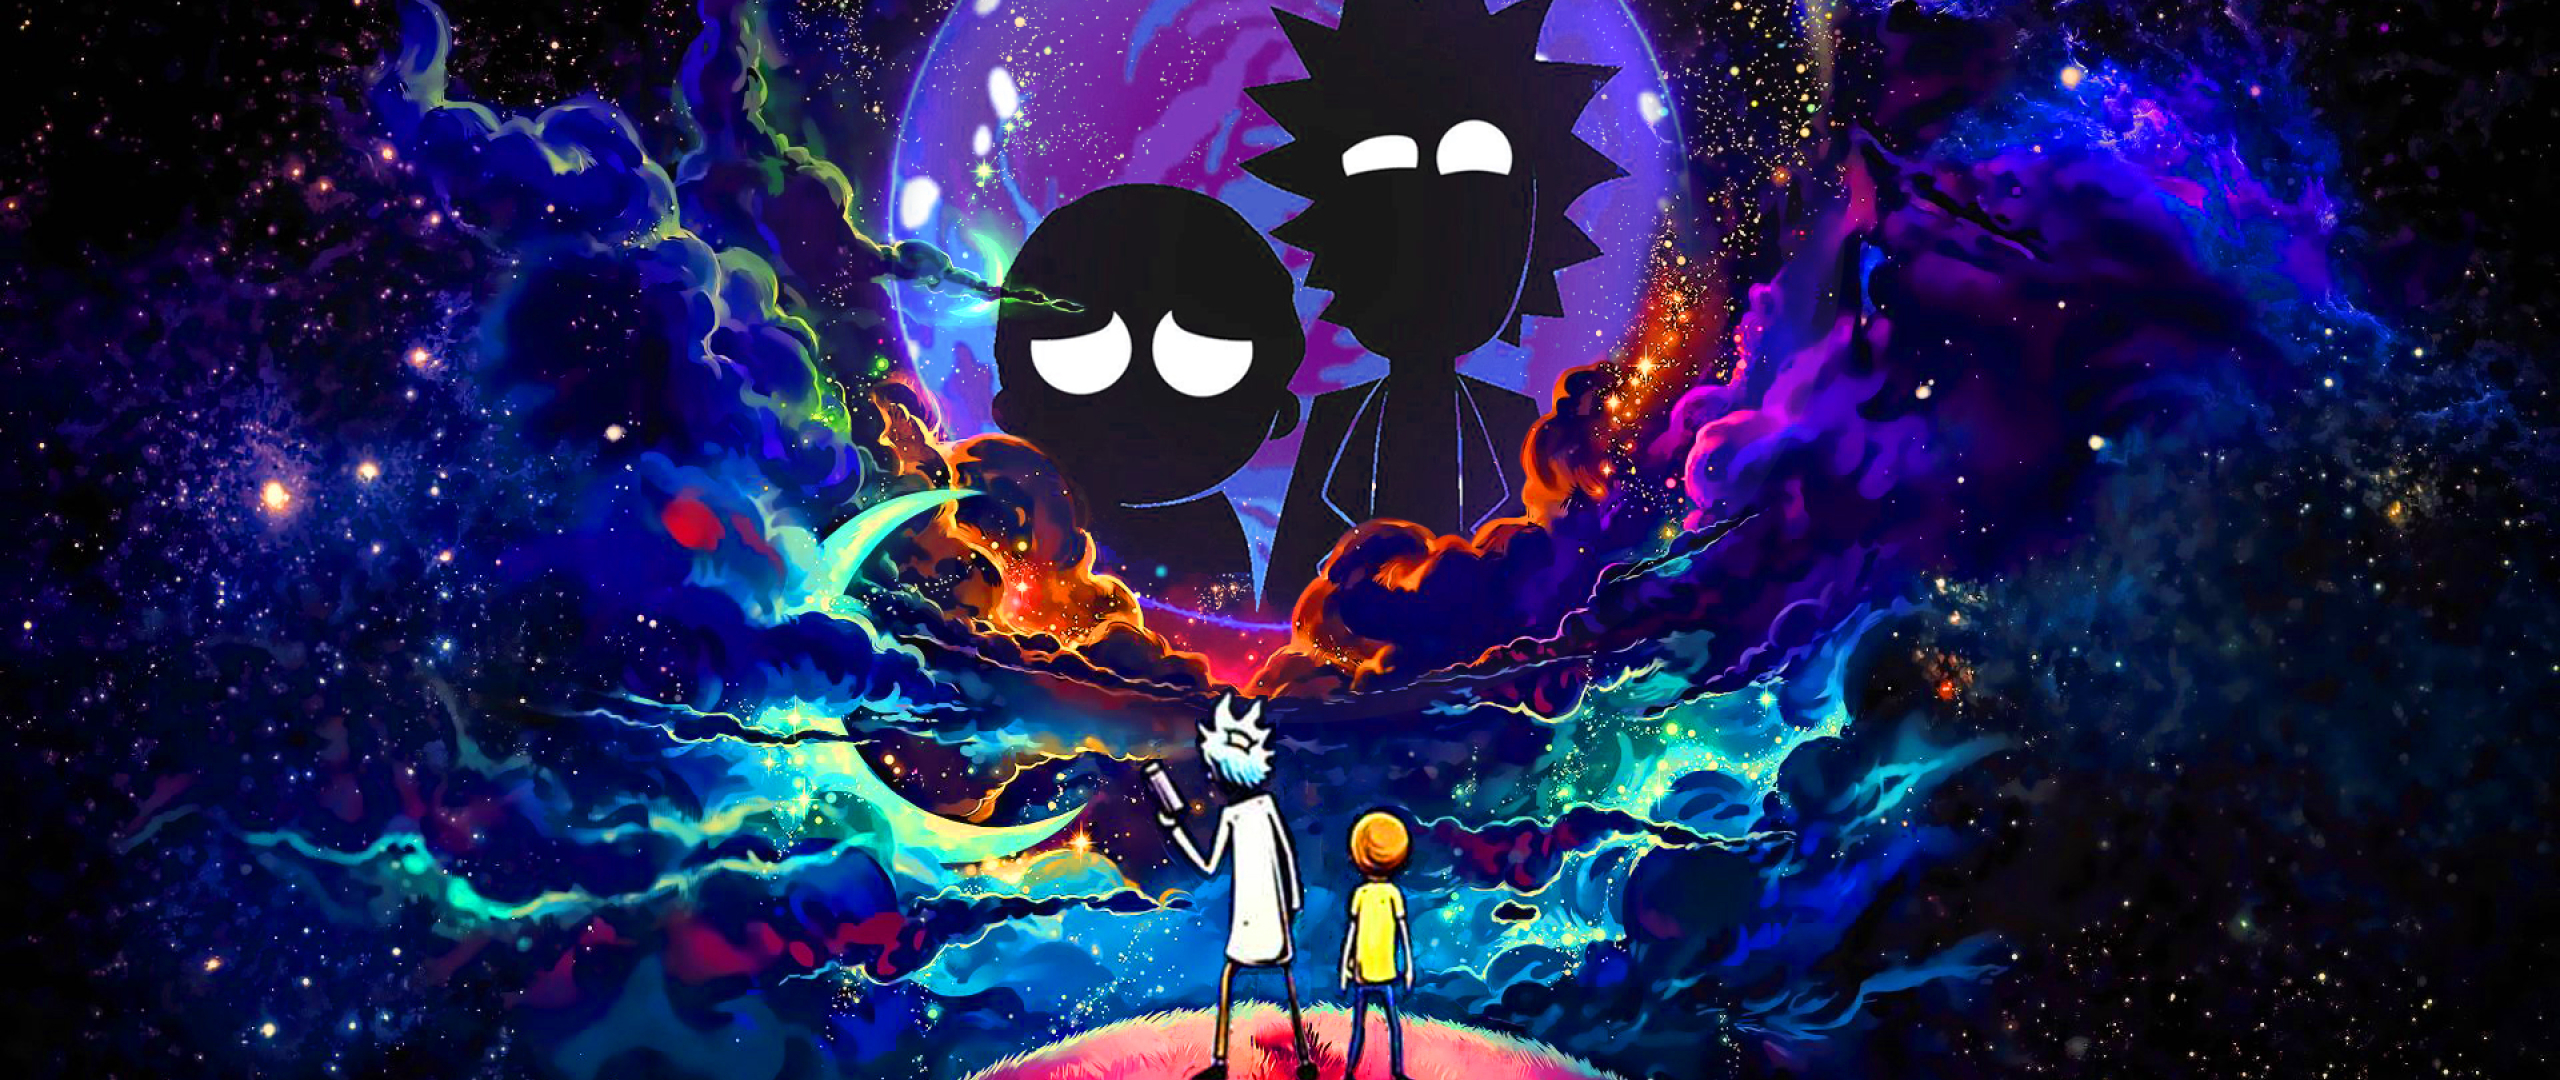 Rick and Morty in Outer Space (2560x1080) Resolution Wallpaper.